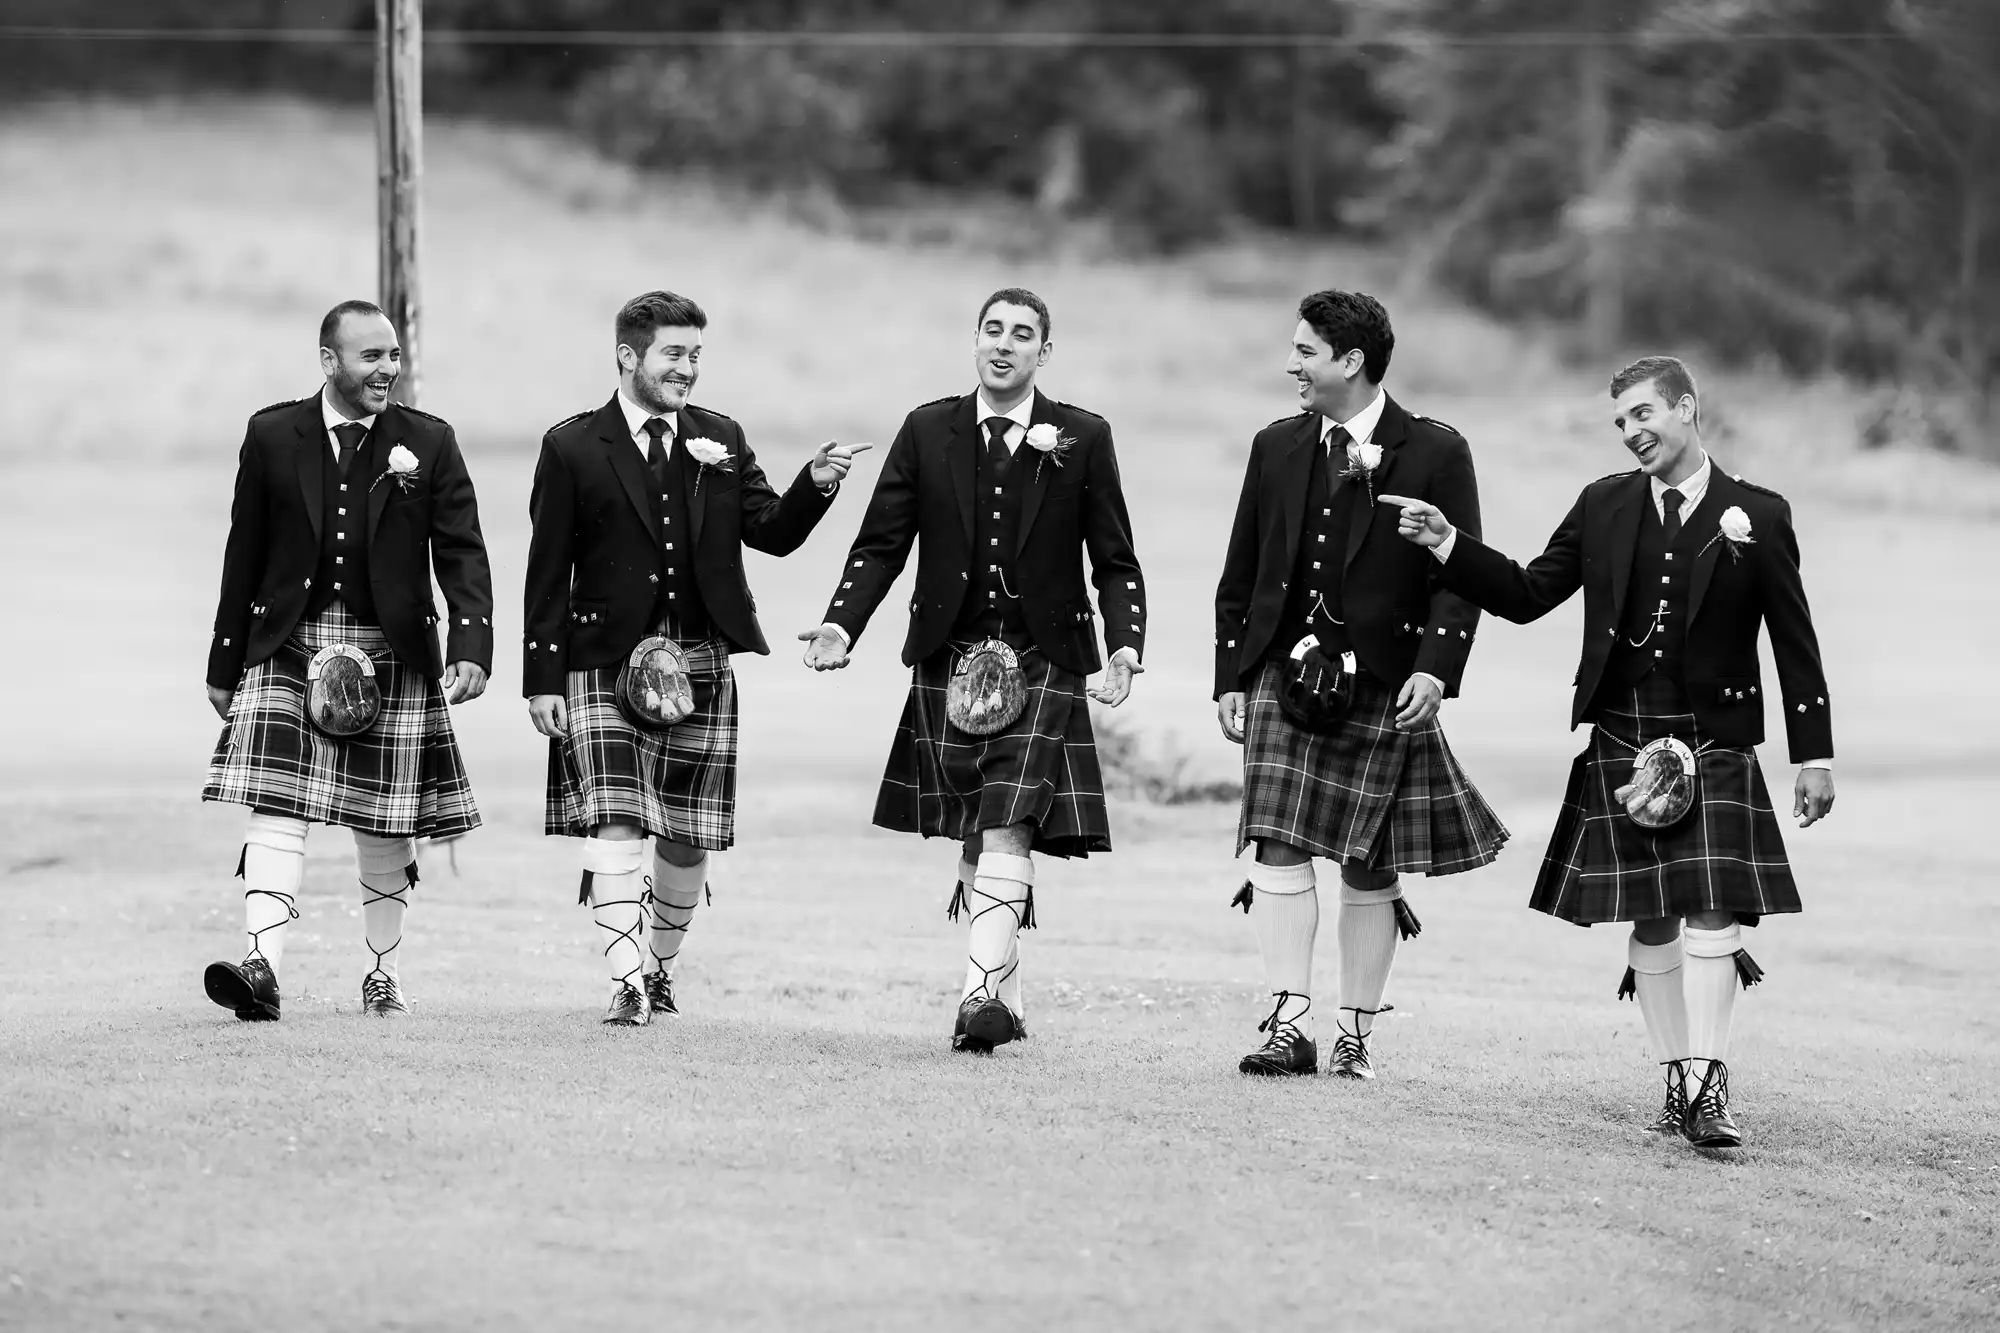 Groom and groomsmen wearing kilts and traditional Scottish attire walk and laugh together outdoors.